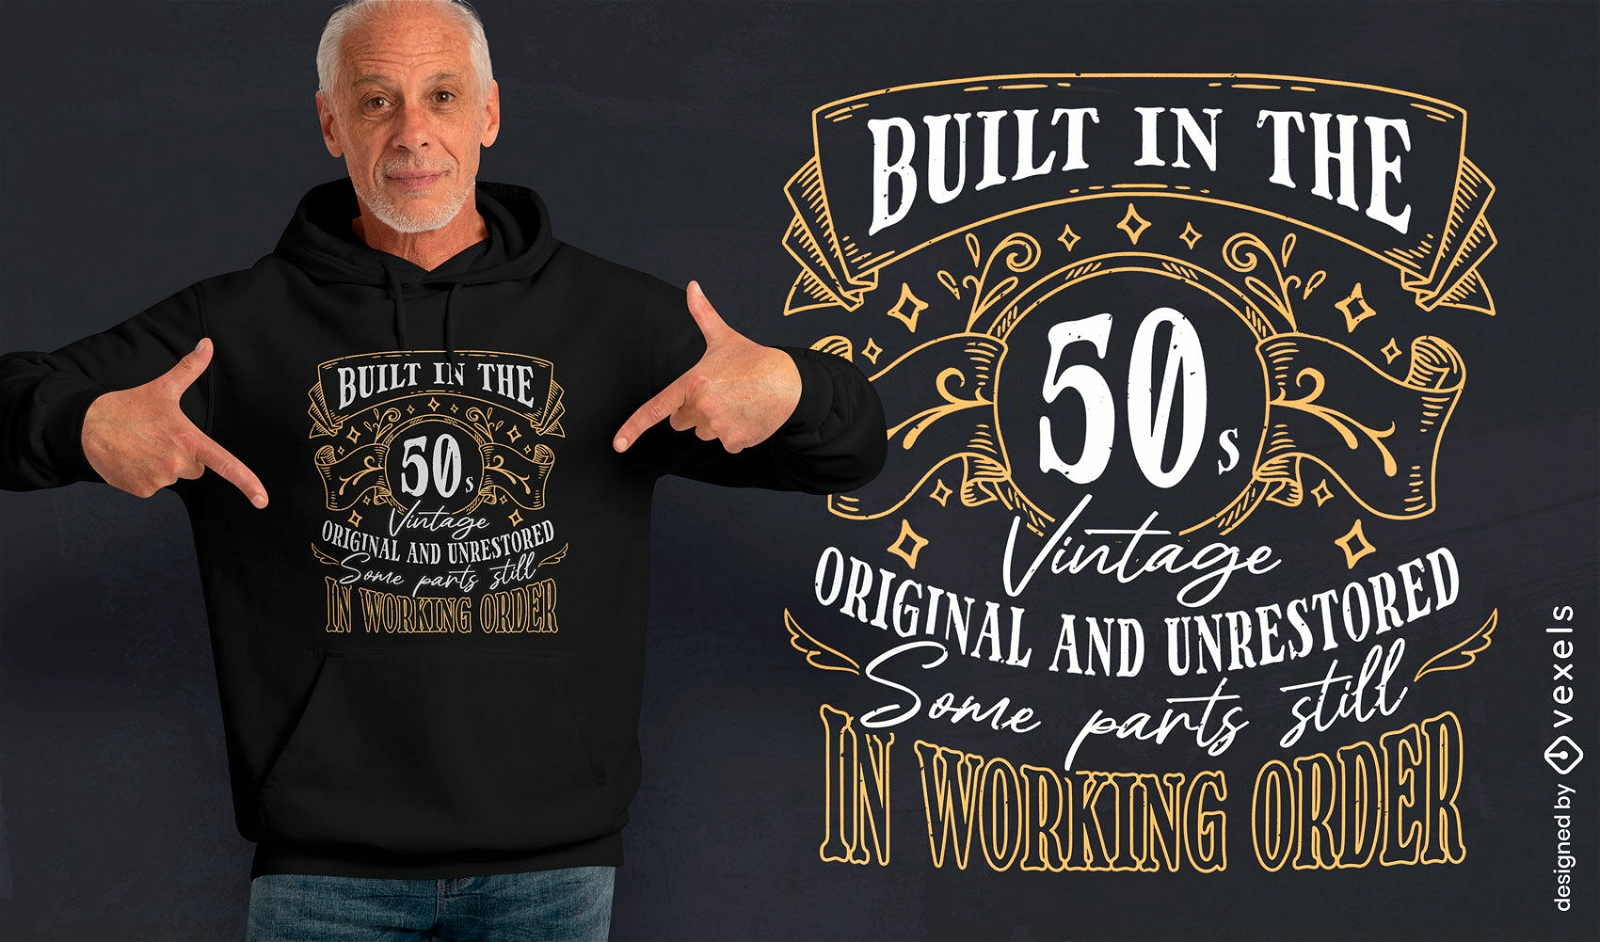 Built in the 50's t-shirt design